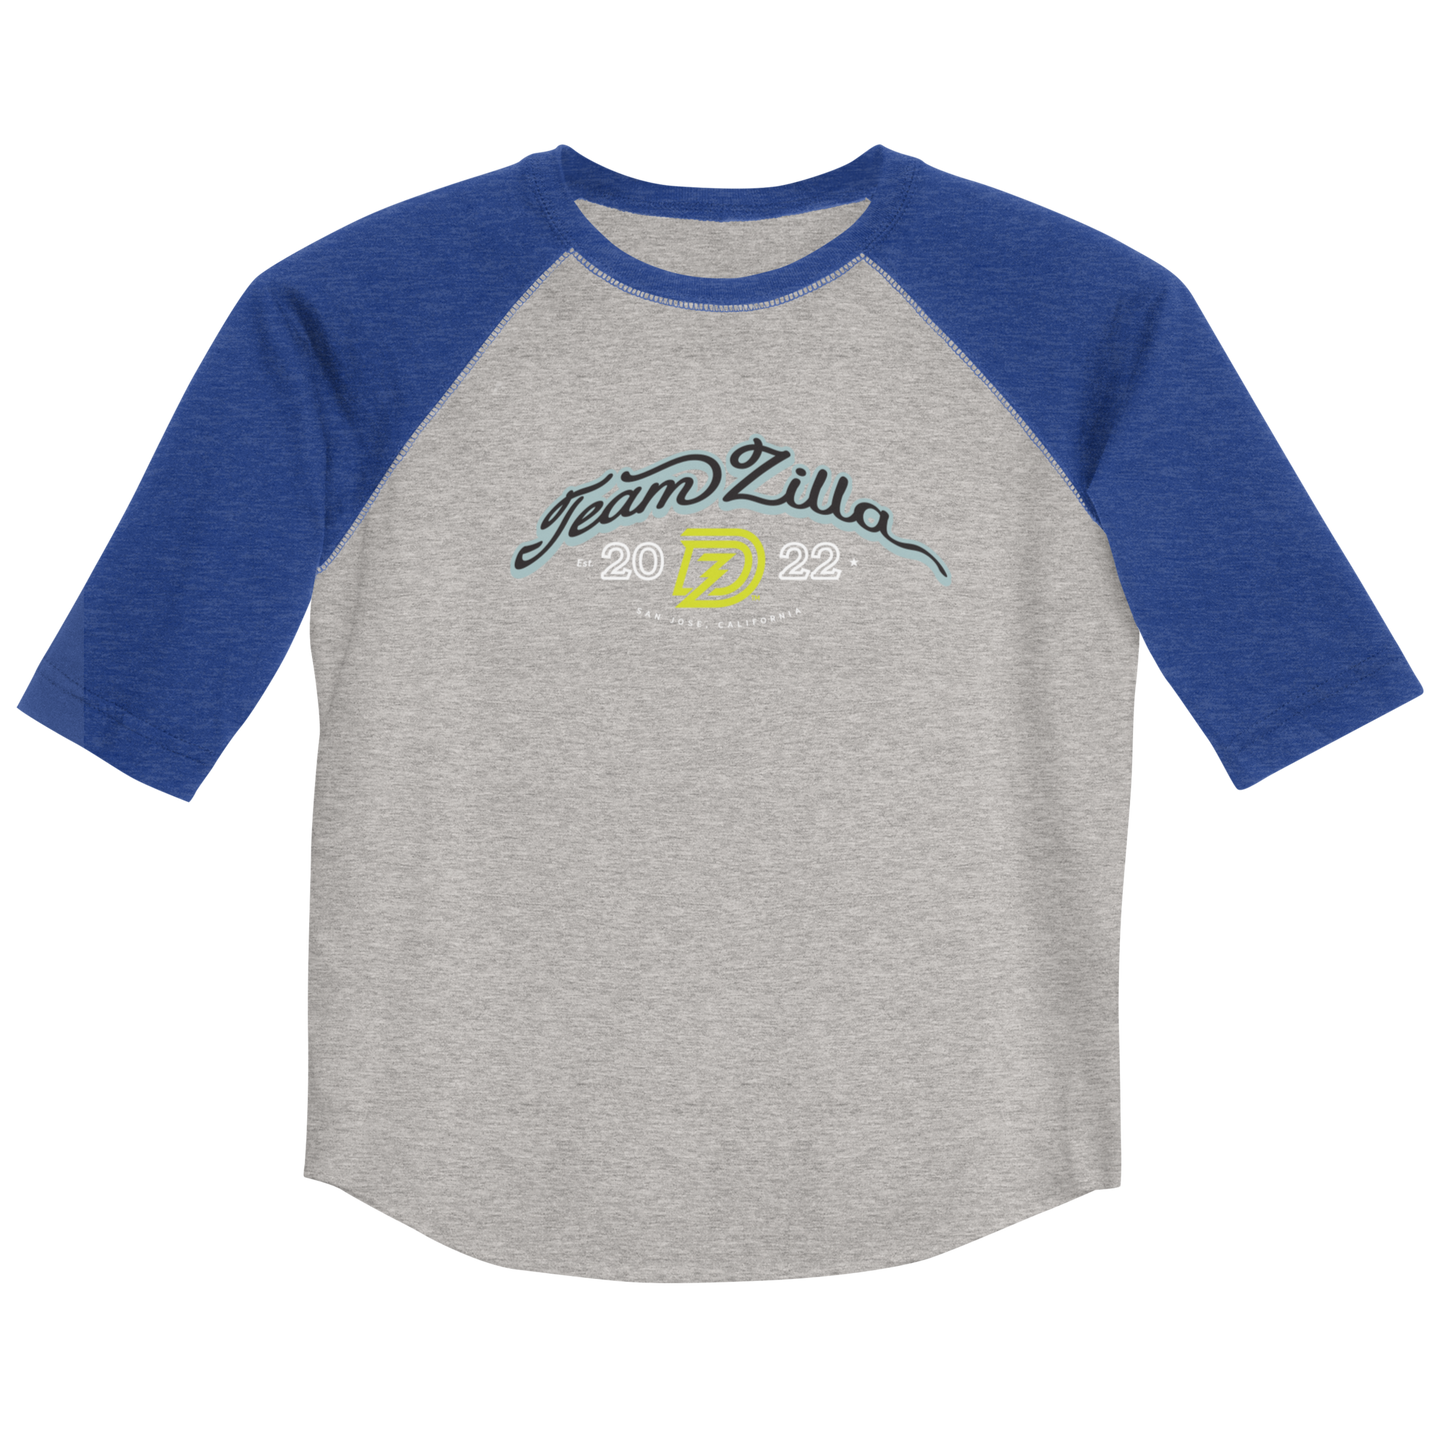 Team Zilla 2022 Youth Shirt in Vintage Heather with Vintage Royal Sleeves